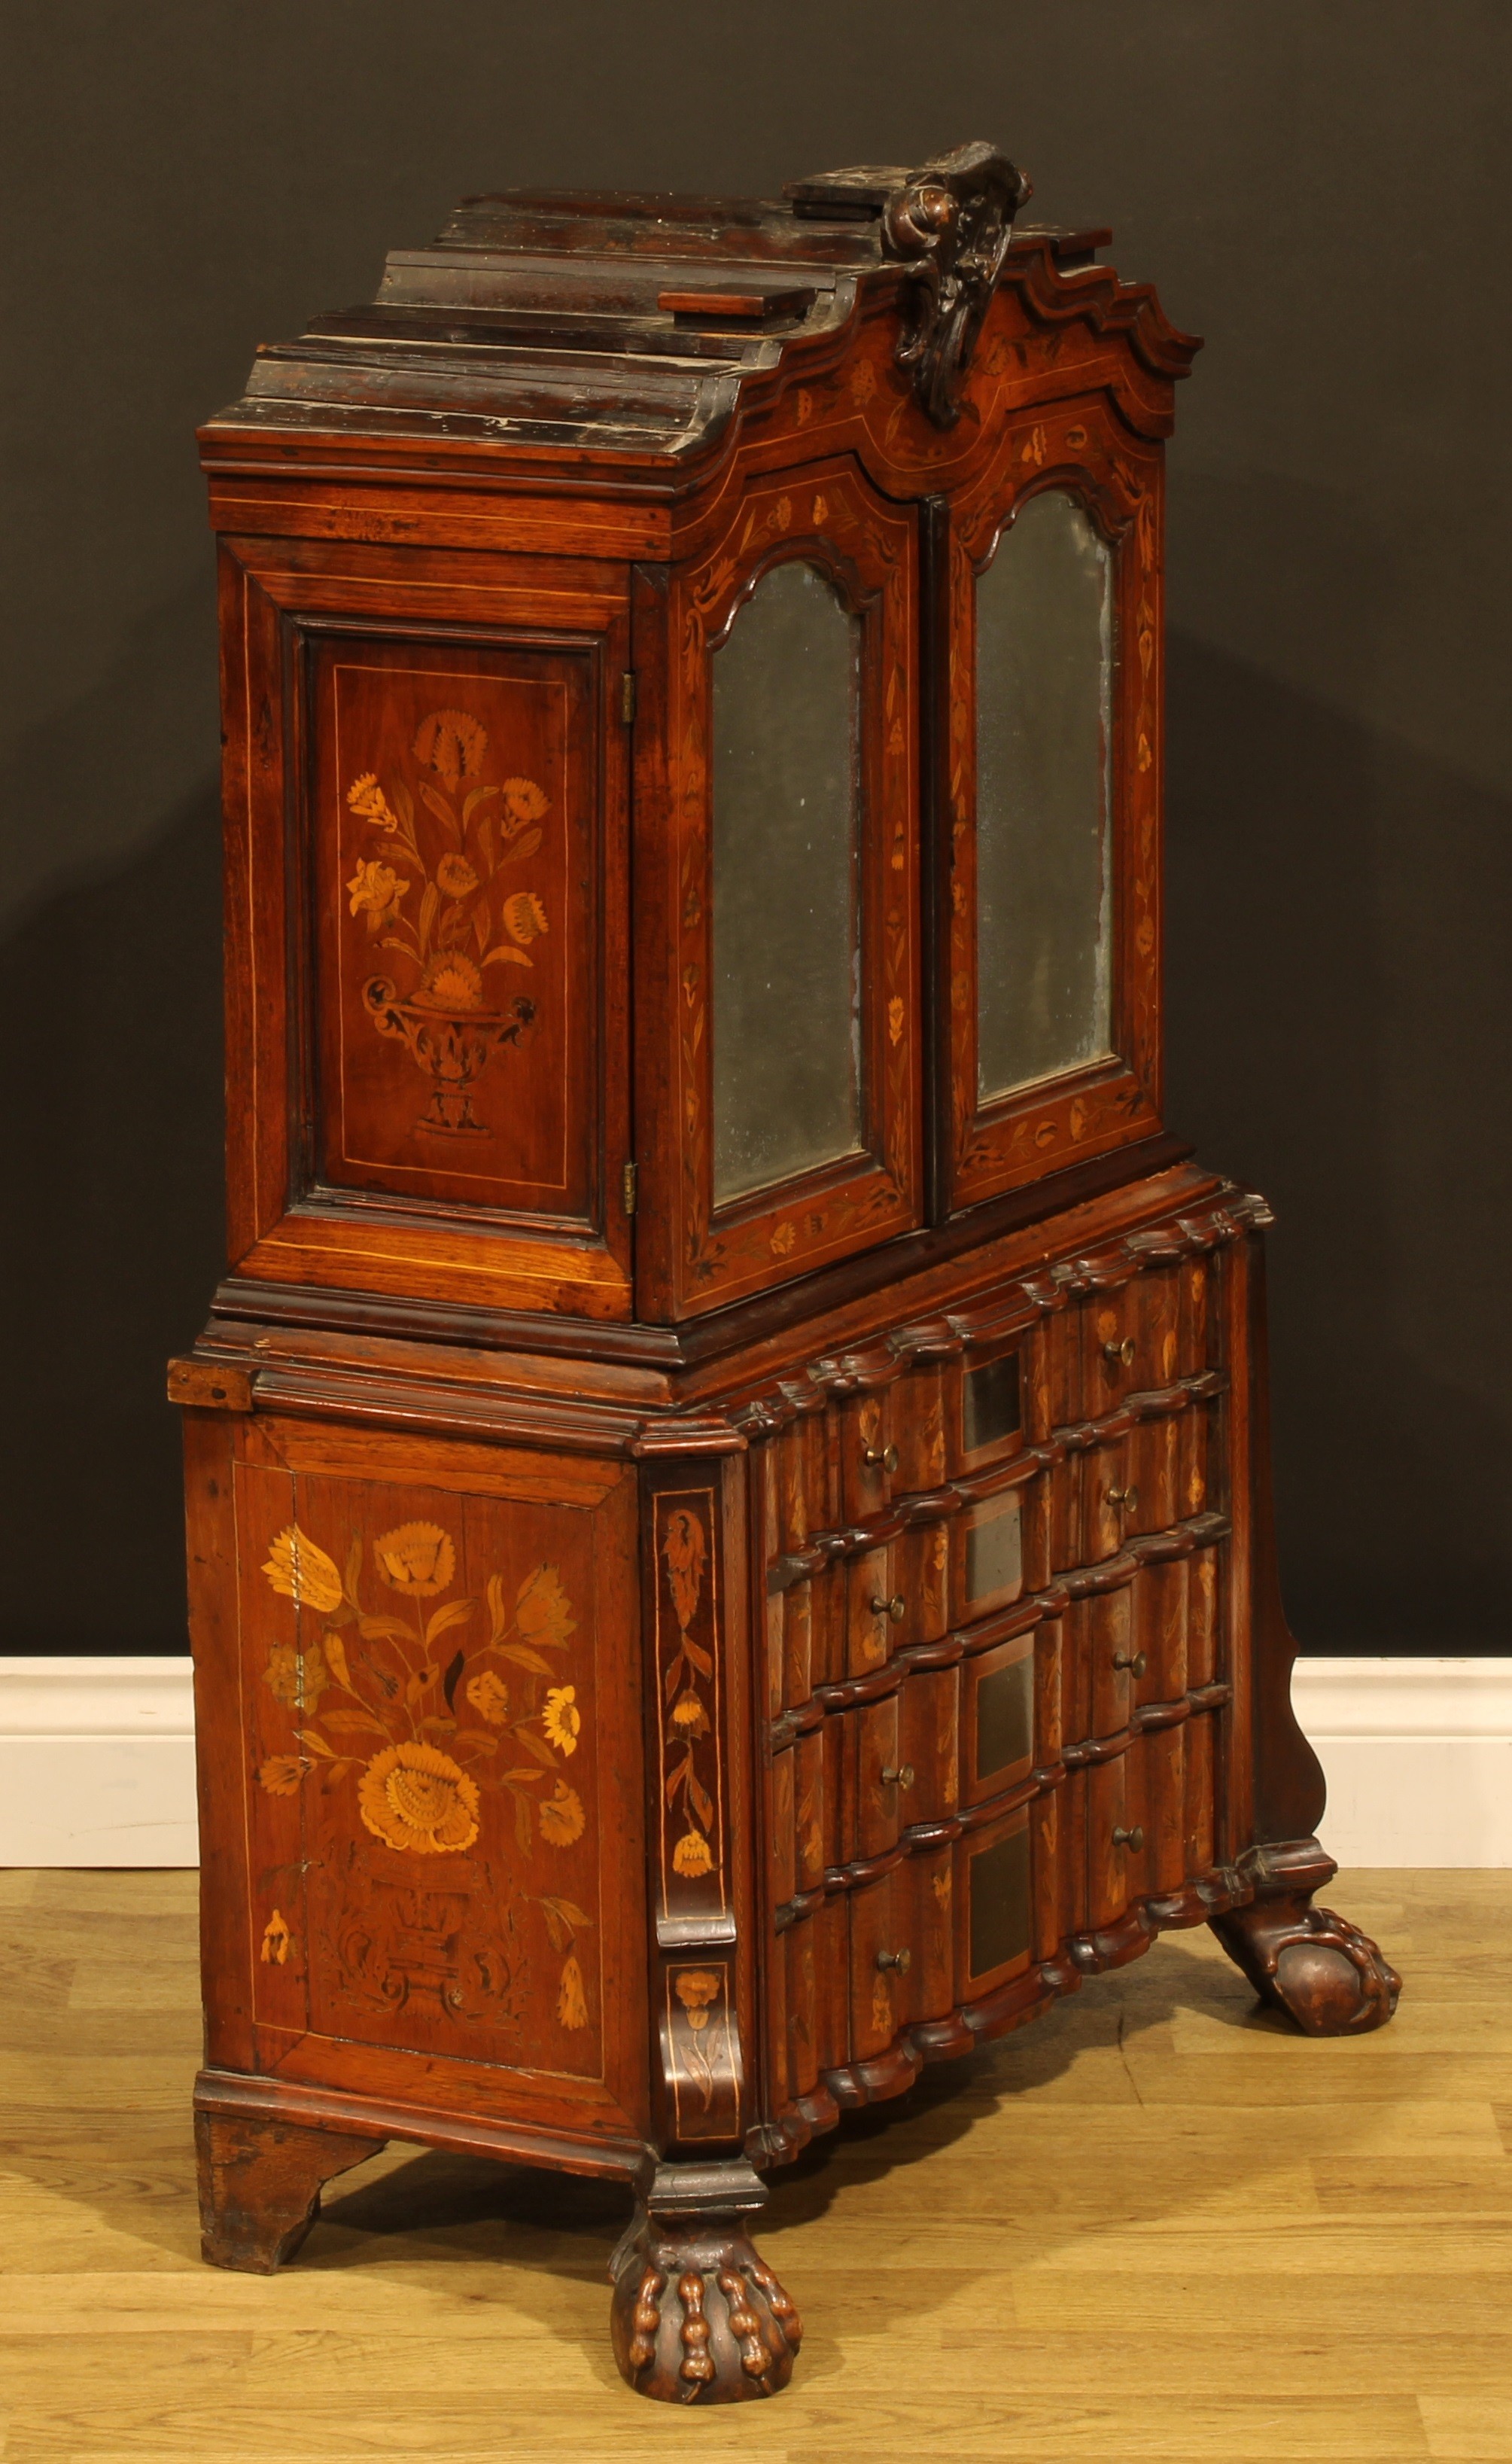 Miniature Furniture - an unusual 19th century Dutch marquetry arc-en-arbalète enclosed collector’s - Image 2 of 5